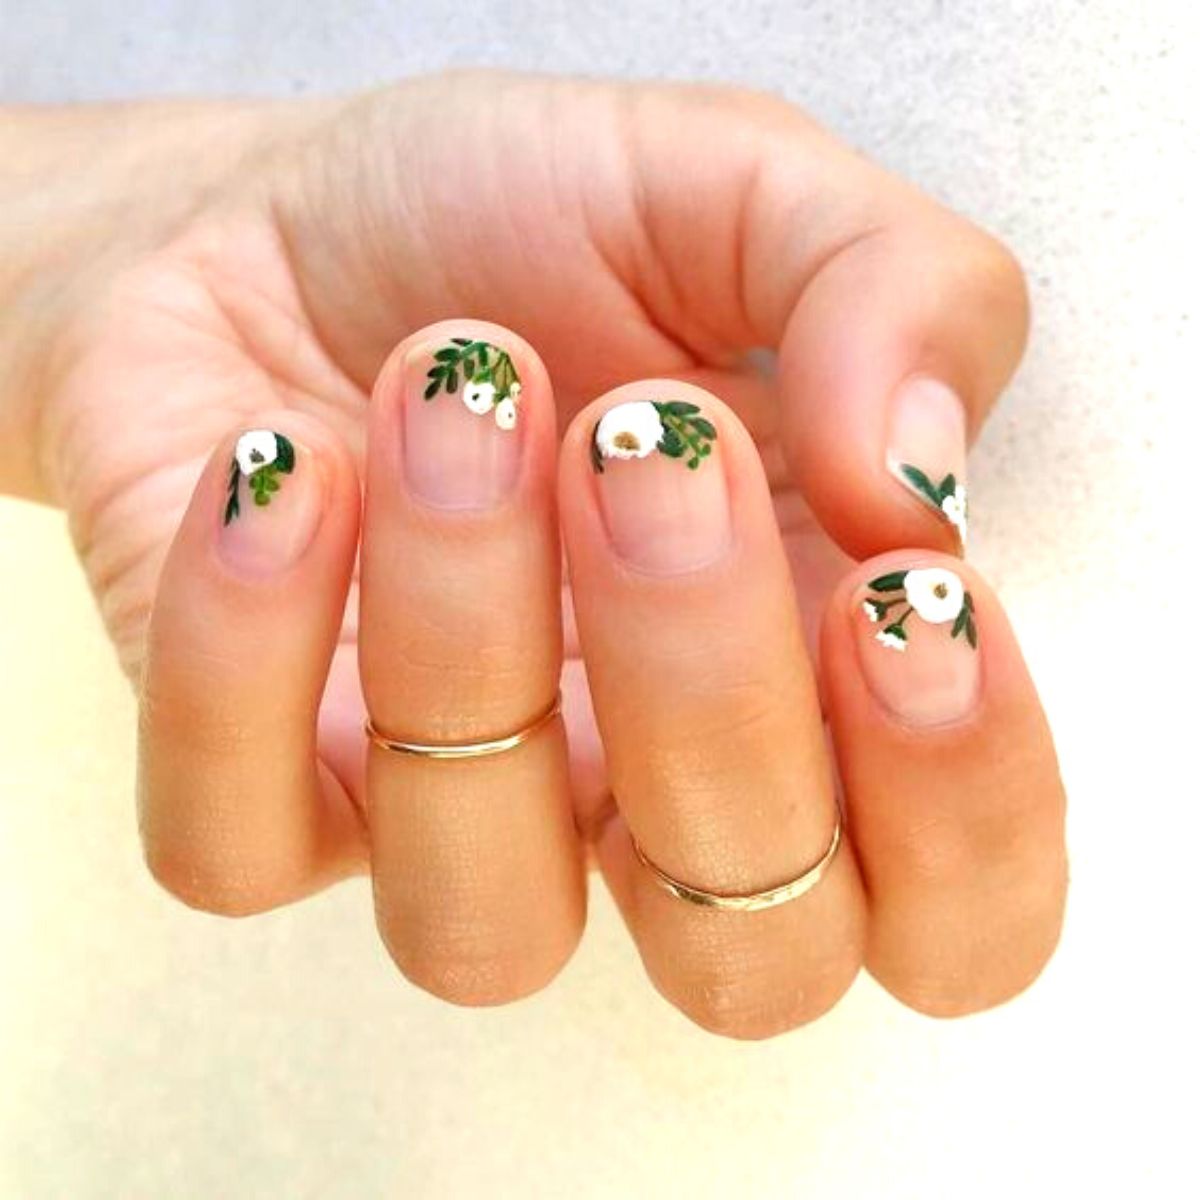 White flowers with foliage nails